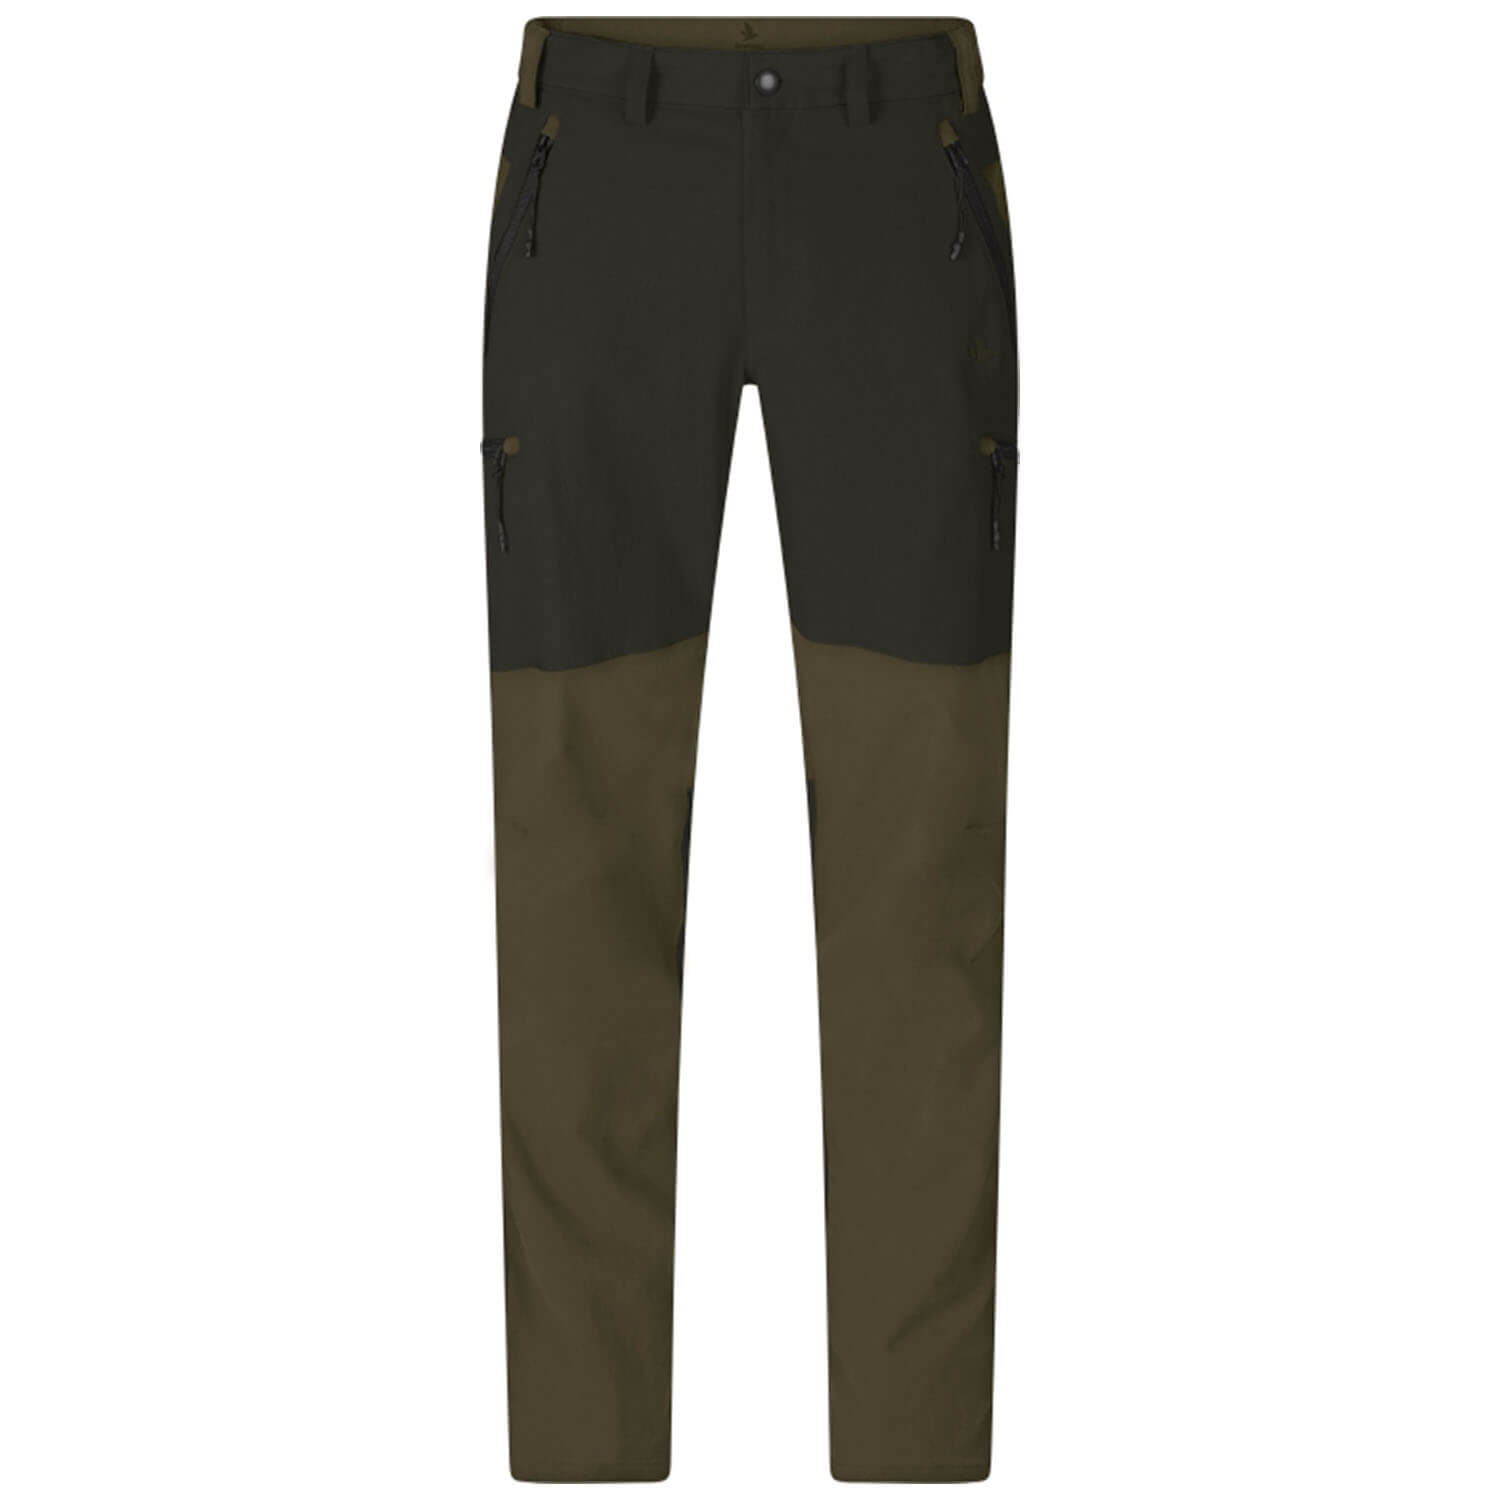 Seeland Jagdhose Outdoor Stretch (Grizzly brown) - Jagdhosen